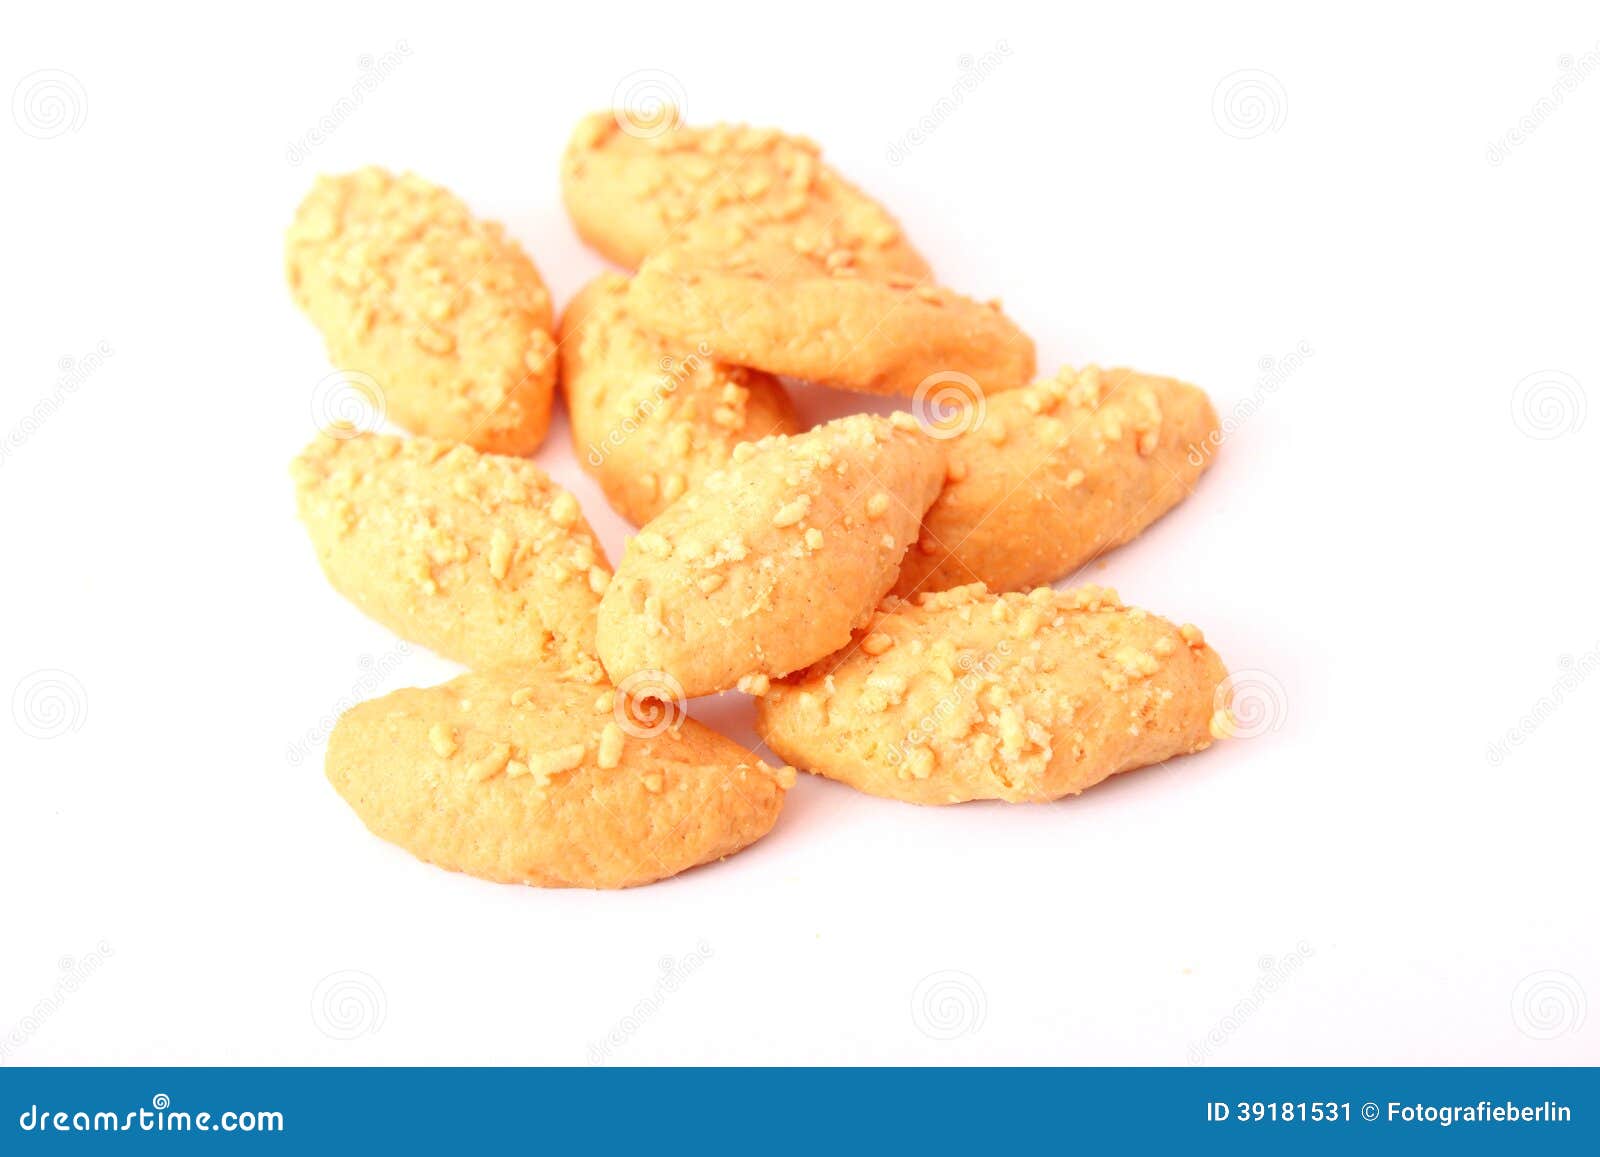 Some fresh cookies with cheese